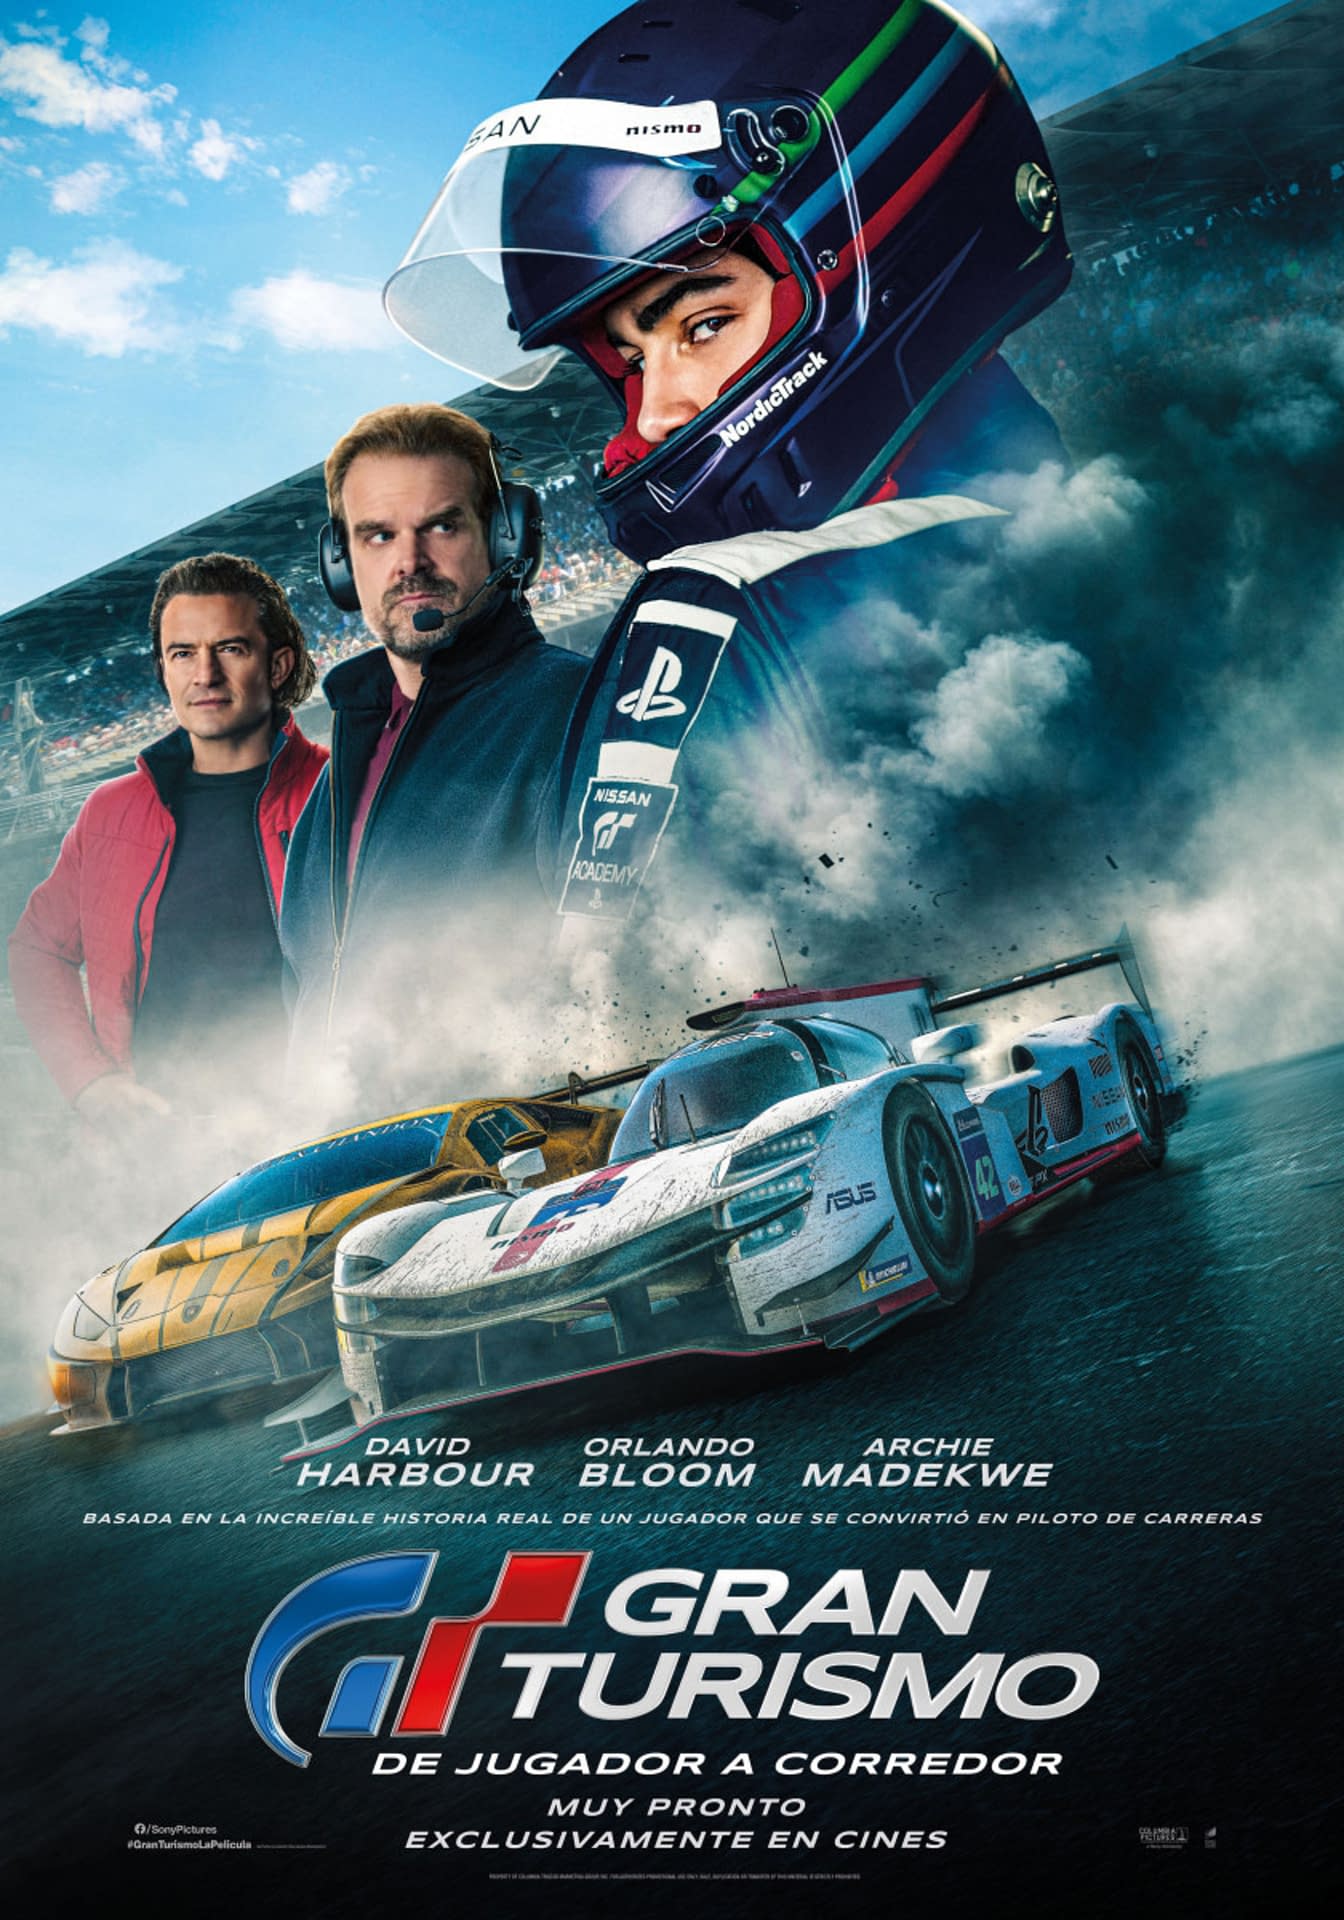 new-international-poster-for-gran-turismo-has-been-released